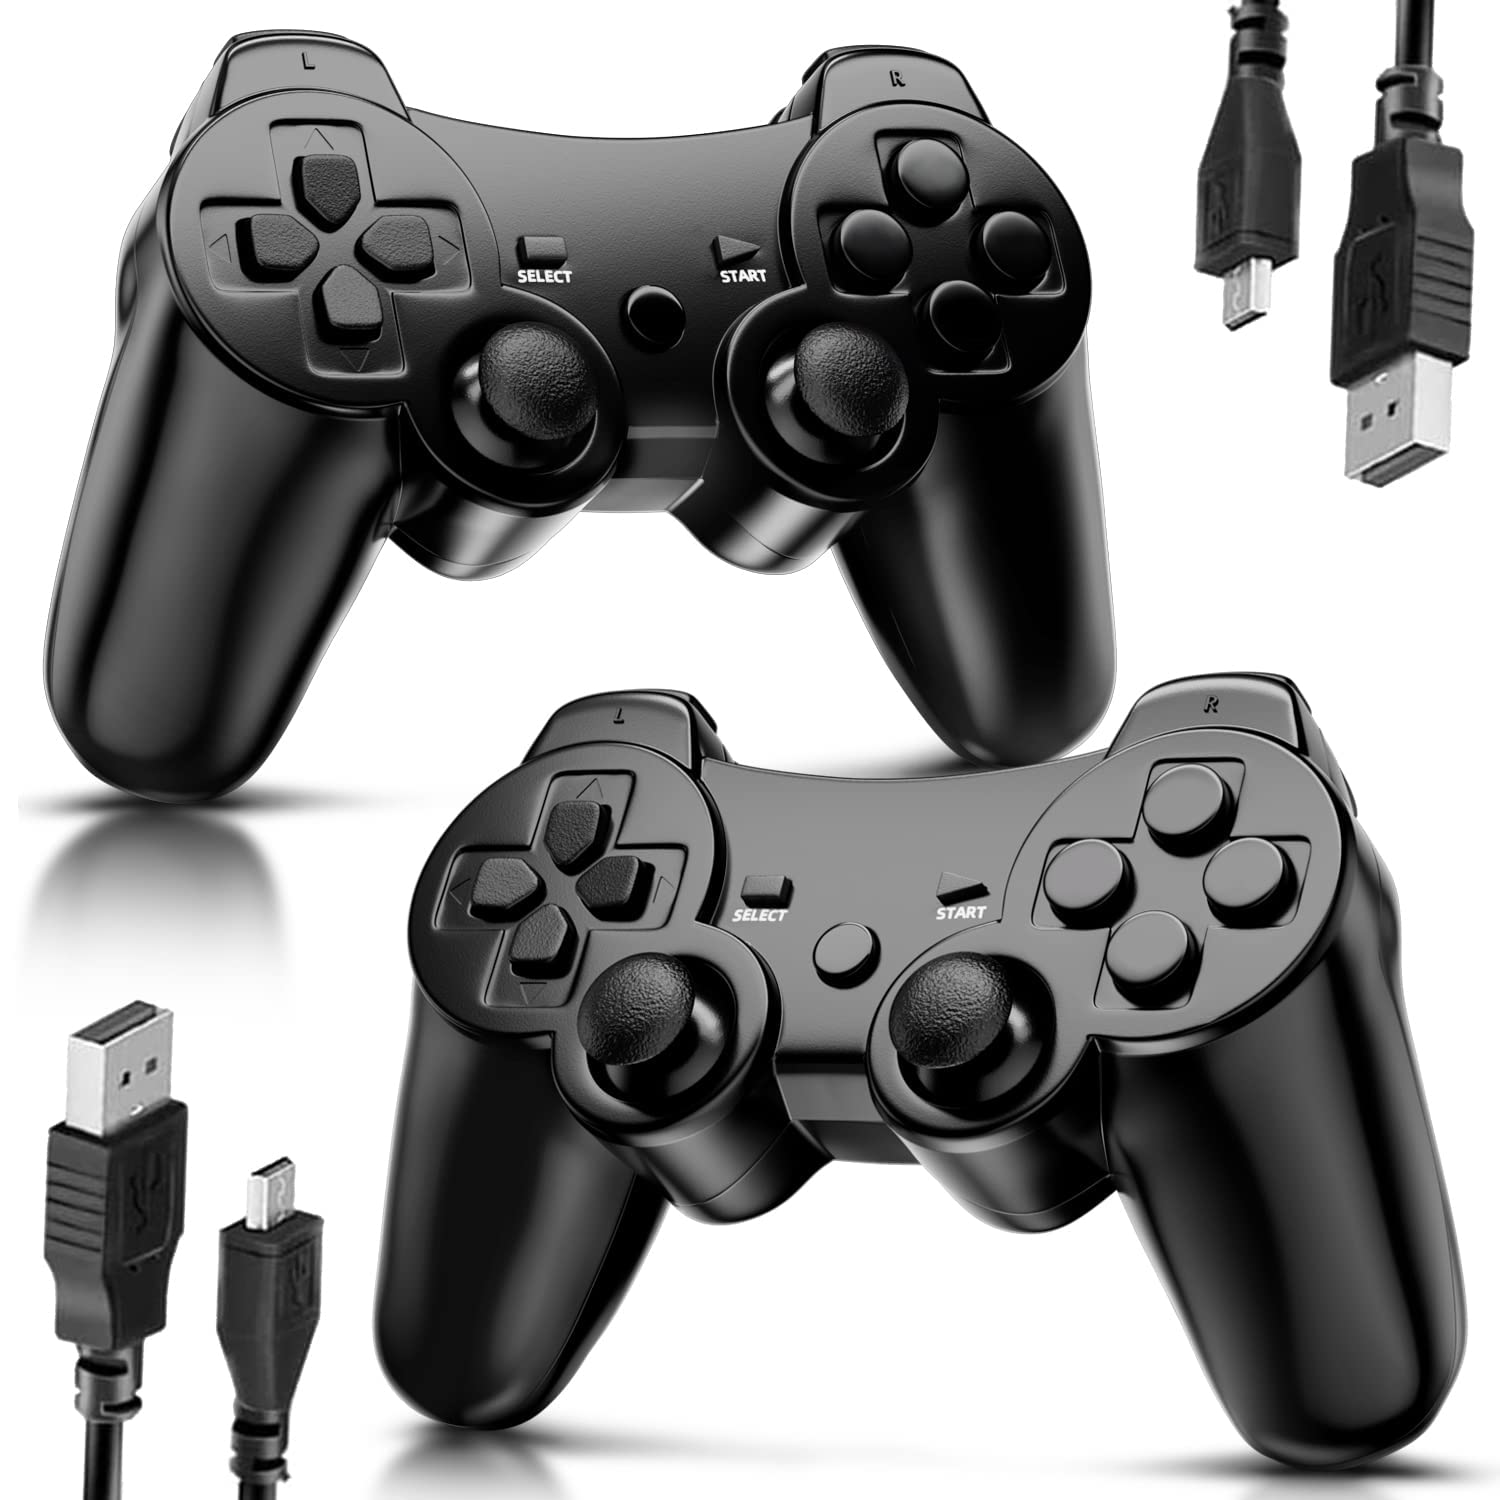 CHENGDAO Controller for PS3 Wireless Controller for Sony 2 Pack Game Controller Compatible with Playstation 3 with High-Performance Motion Sense Double Vibration and Charging Cable